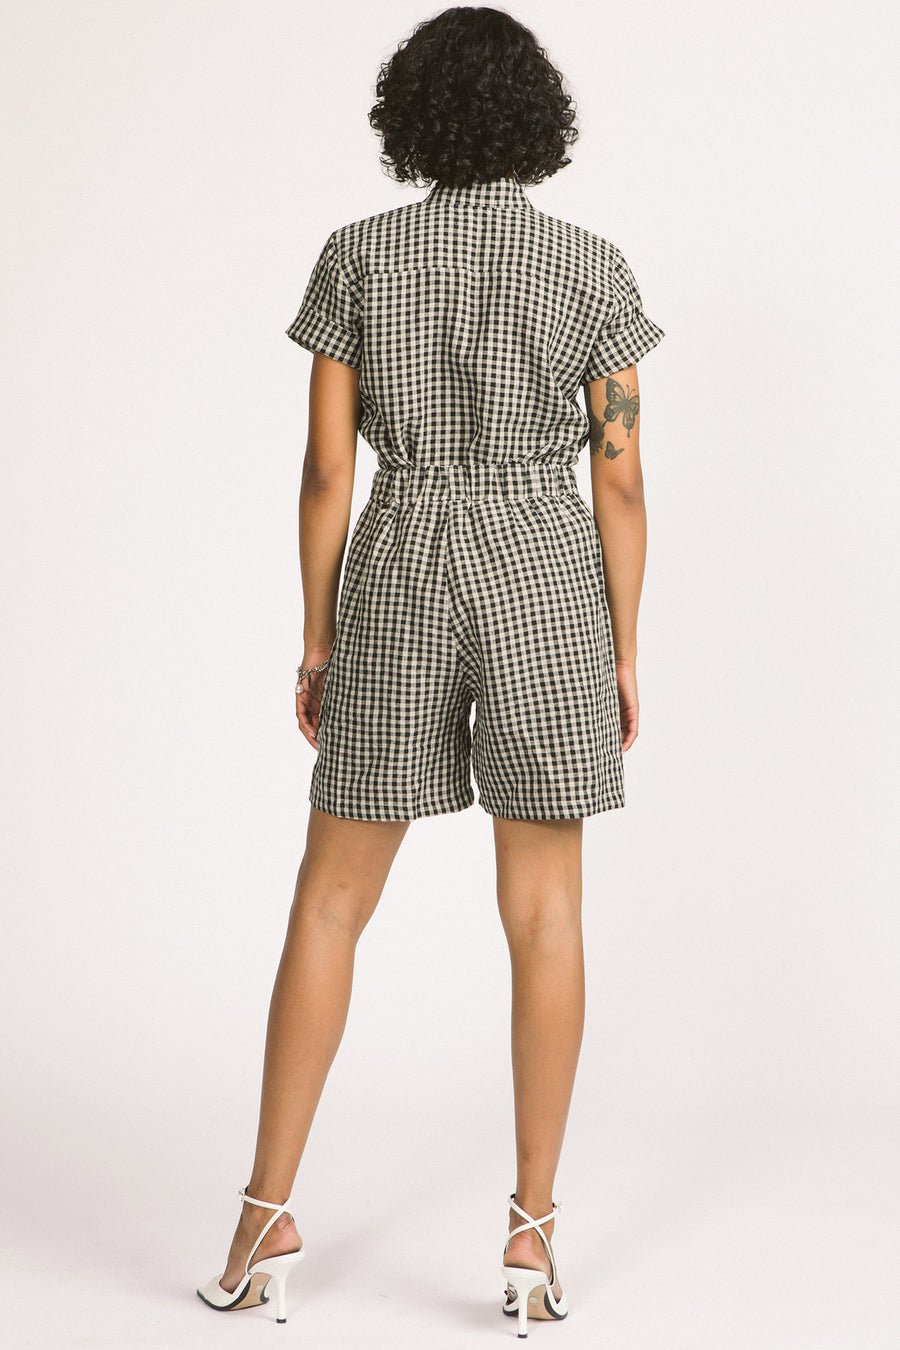 Back view of woman wearing black and white gingham Kim shorts by Allison Wonderland. 